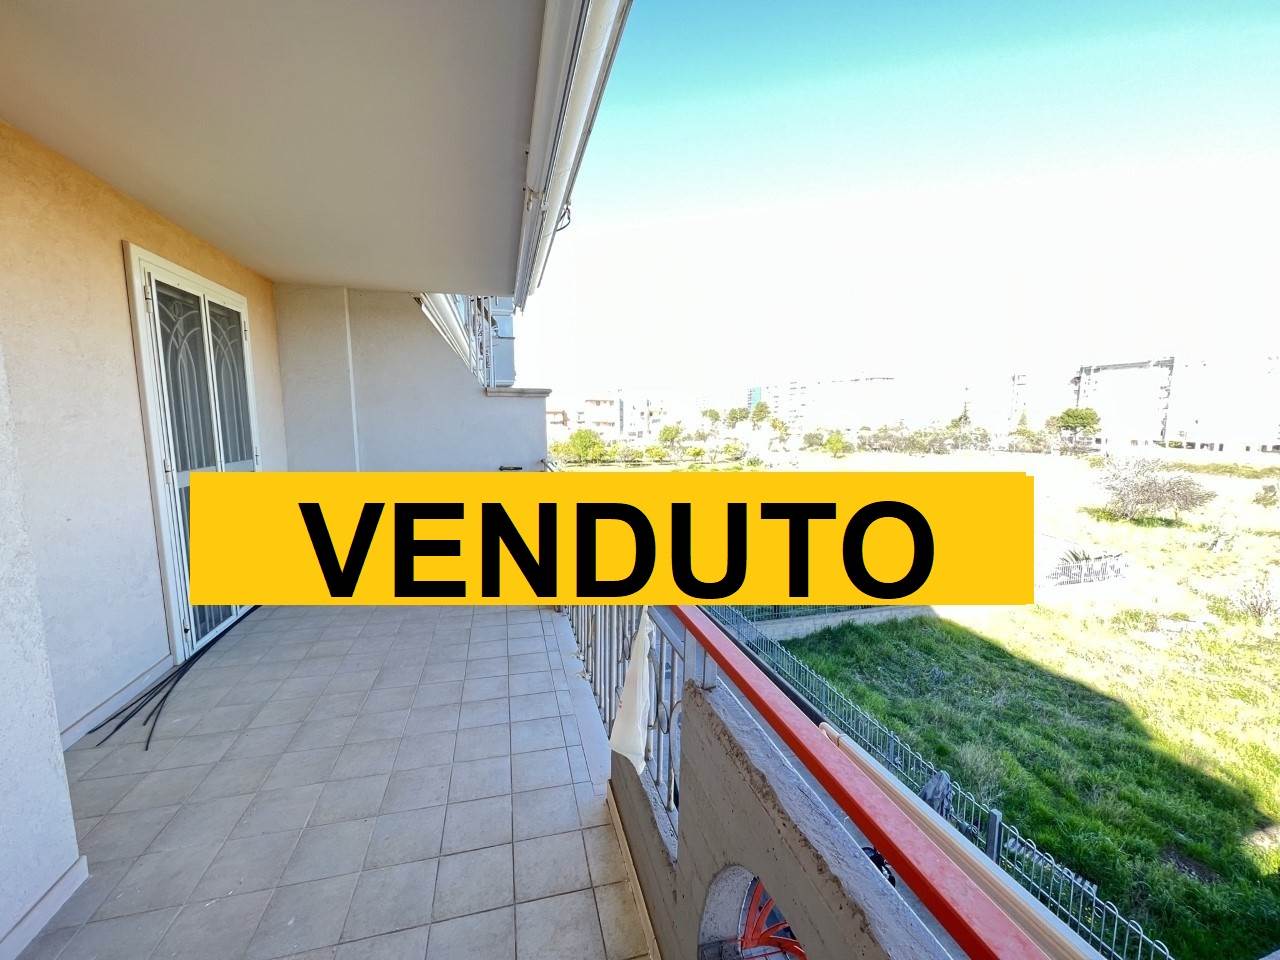 CARBONARA / CEGLIE, BARI, Apartment for sale of 119 Sq. mt., Good condition, Heating Individual heating system, Energetic class: G, placed at 2°, 